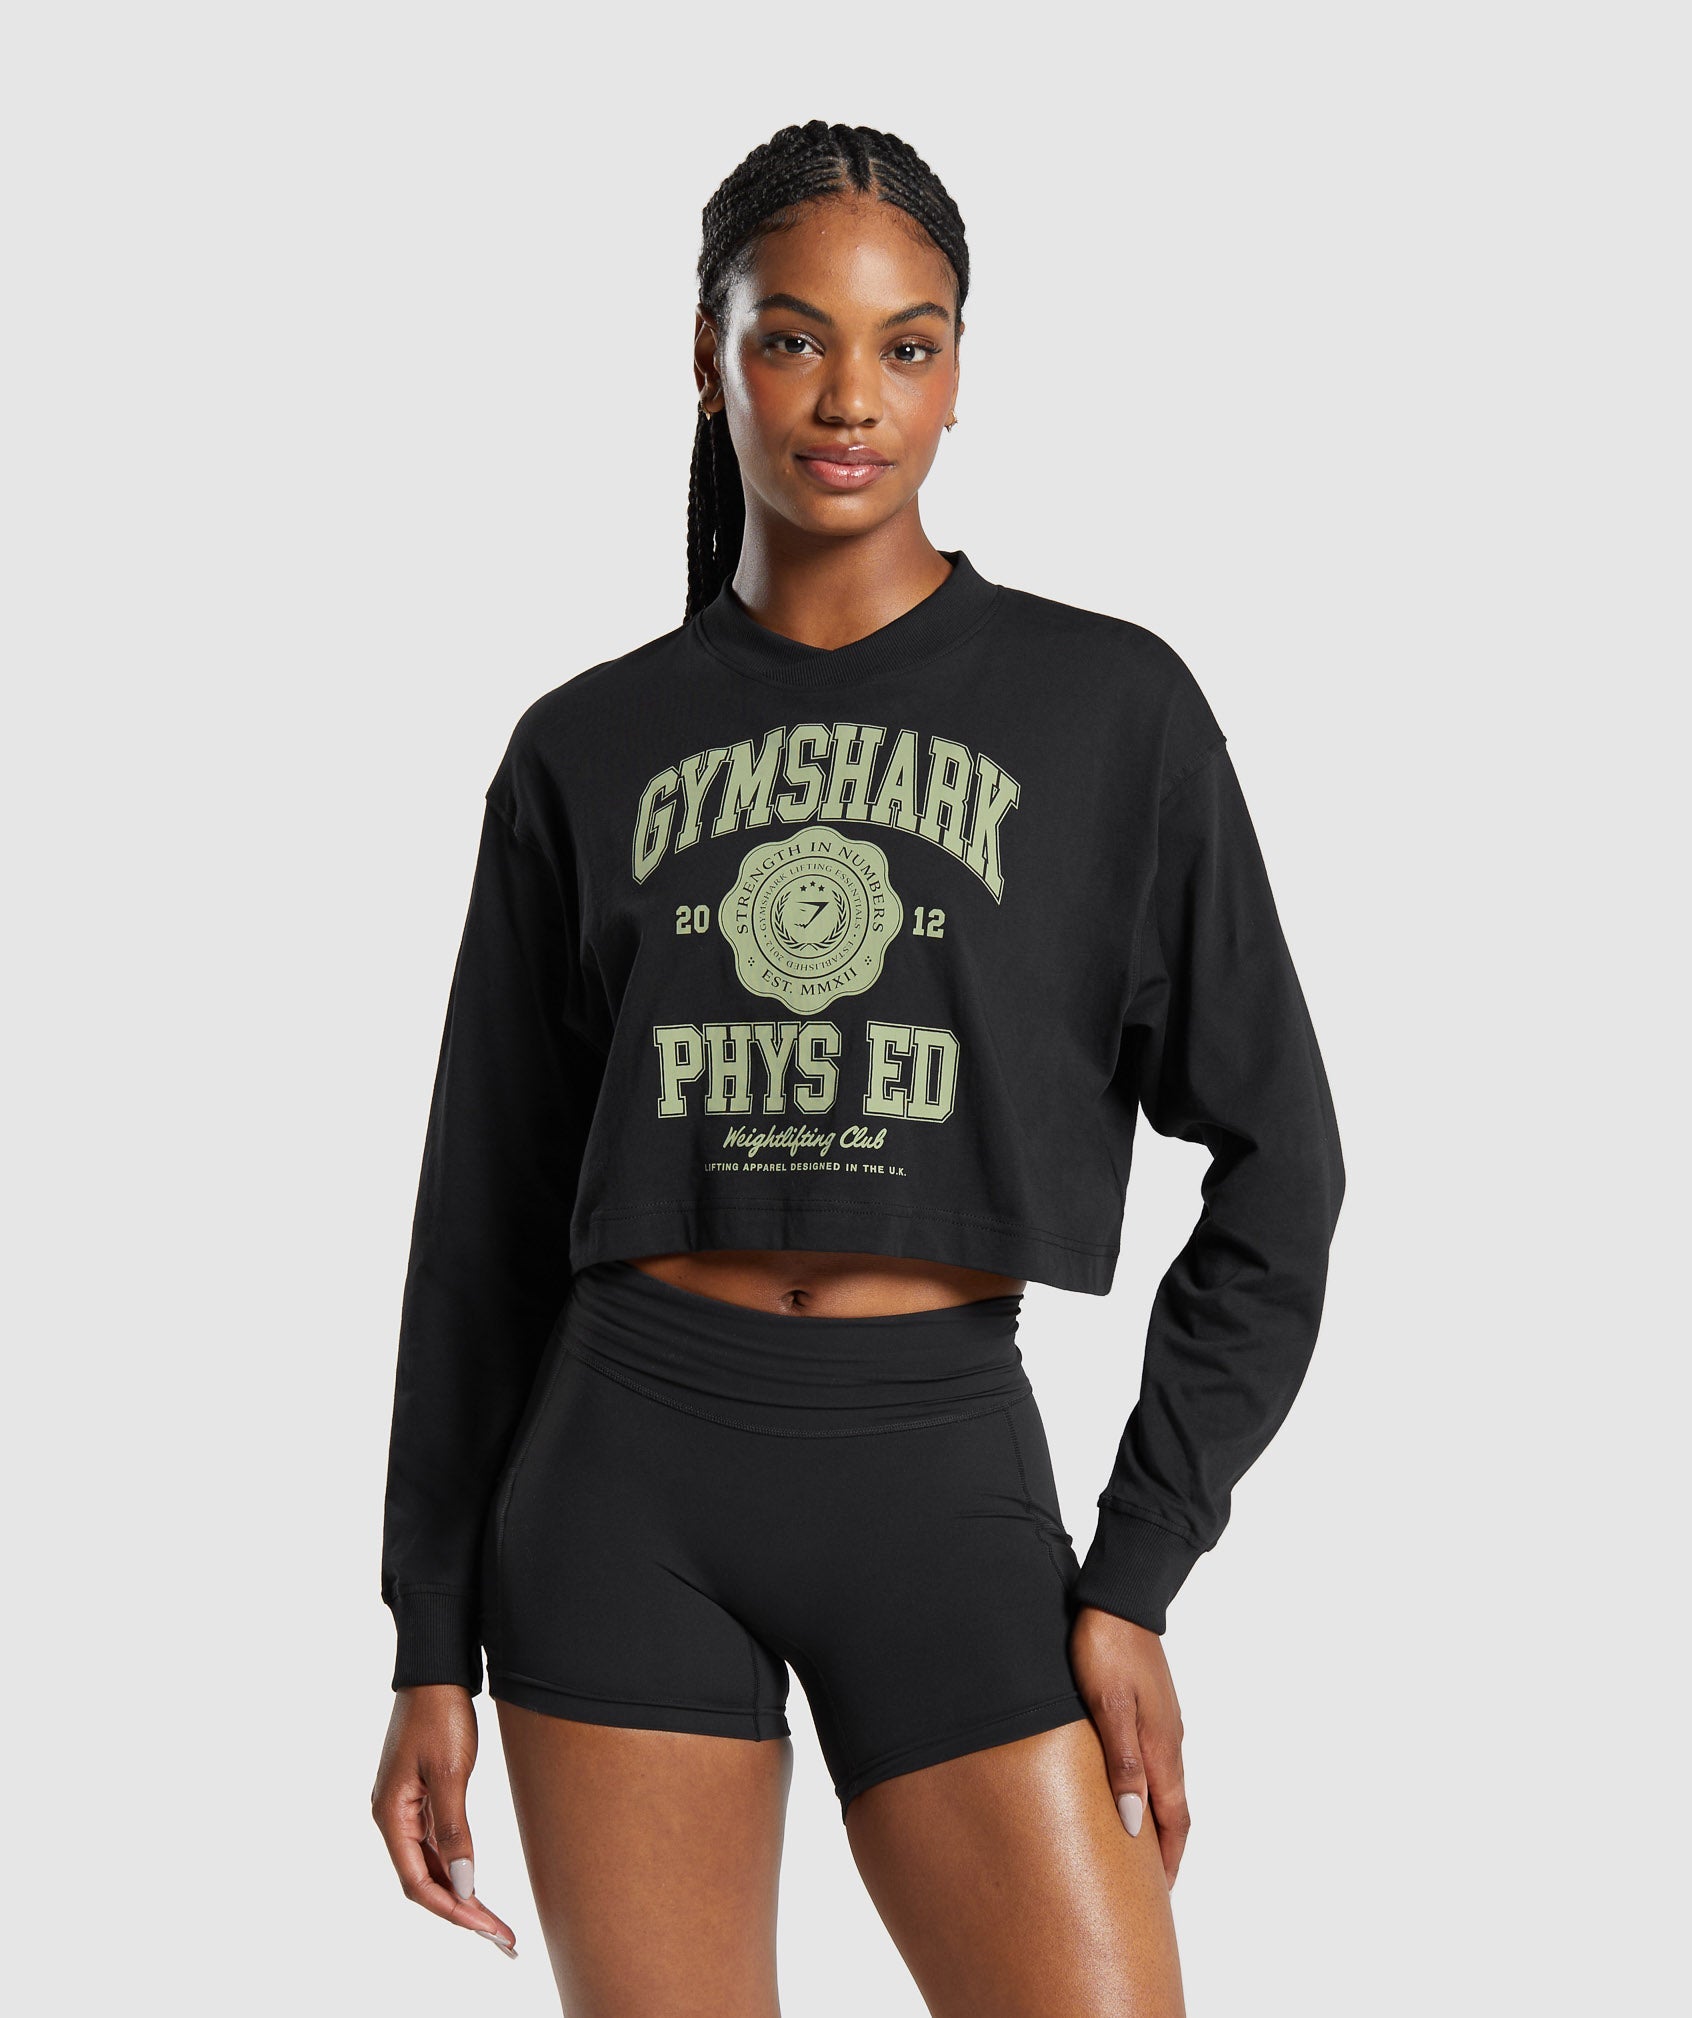 Phys Ed Graphic Long Sleeve T-Shirt in Black - view 1